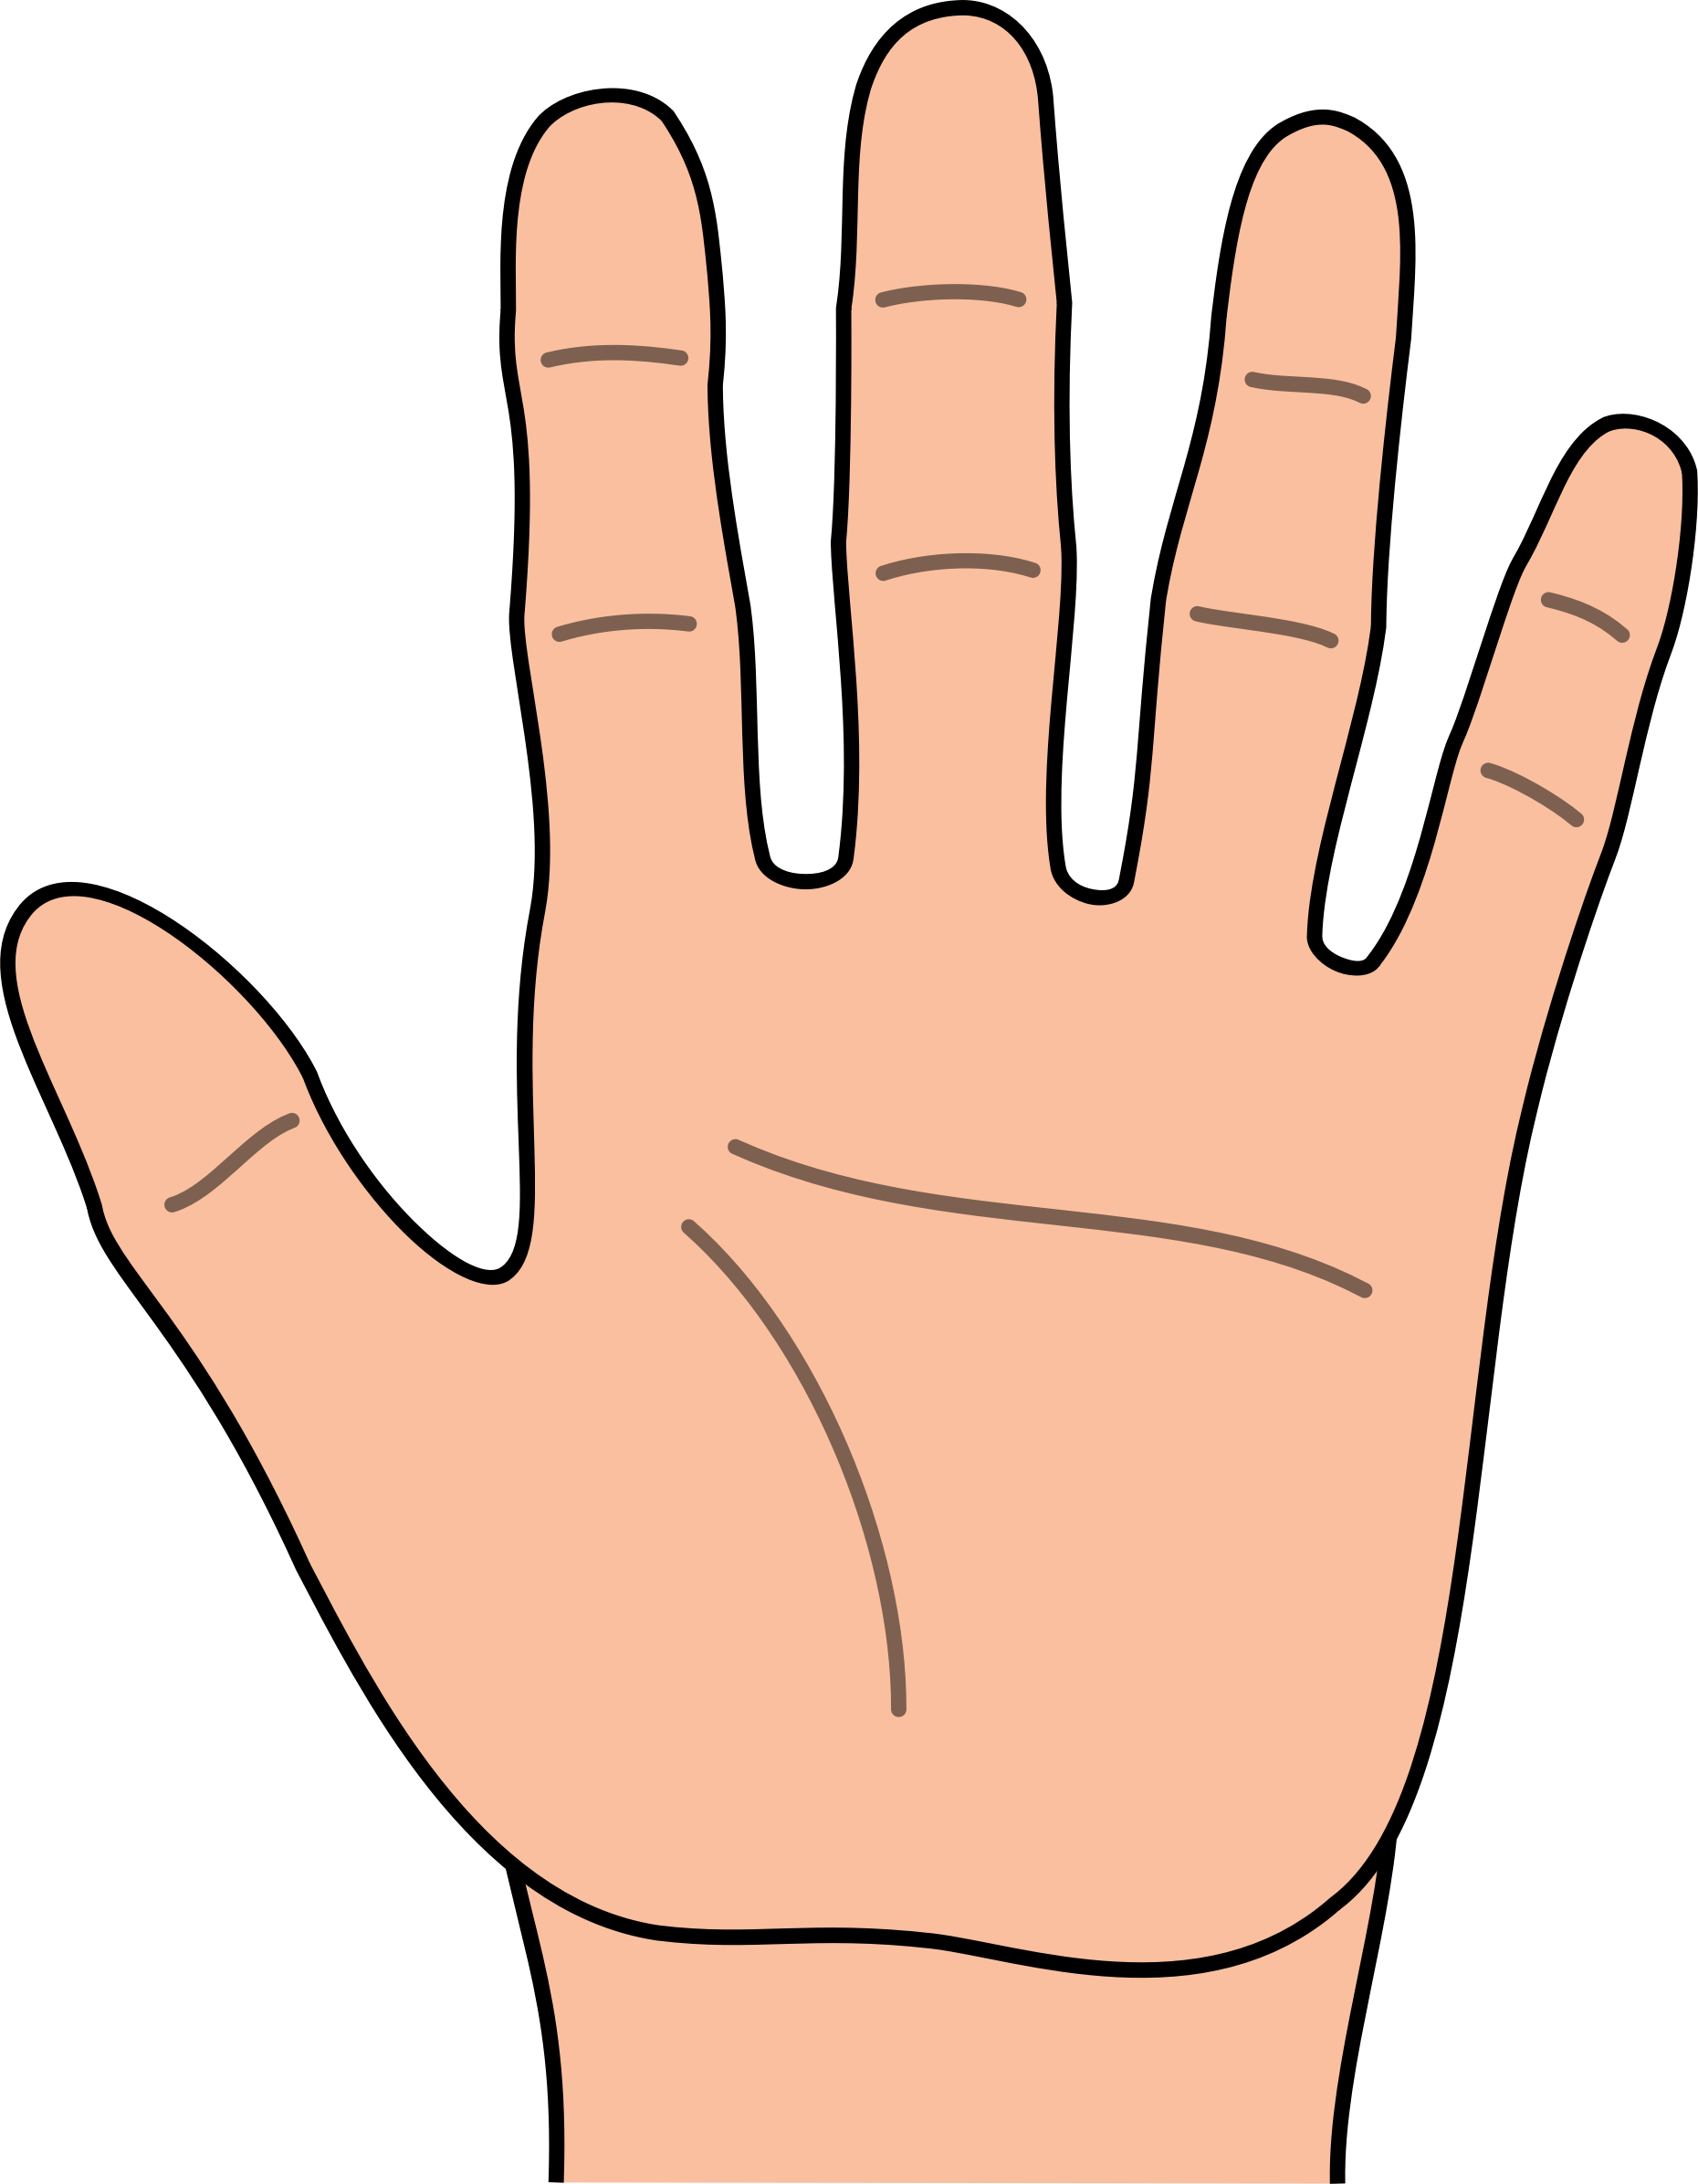 Hands on clipart